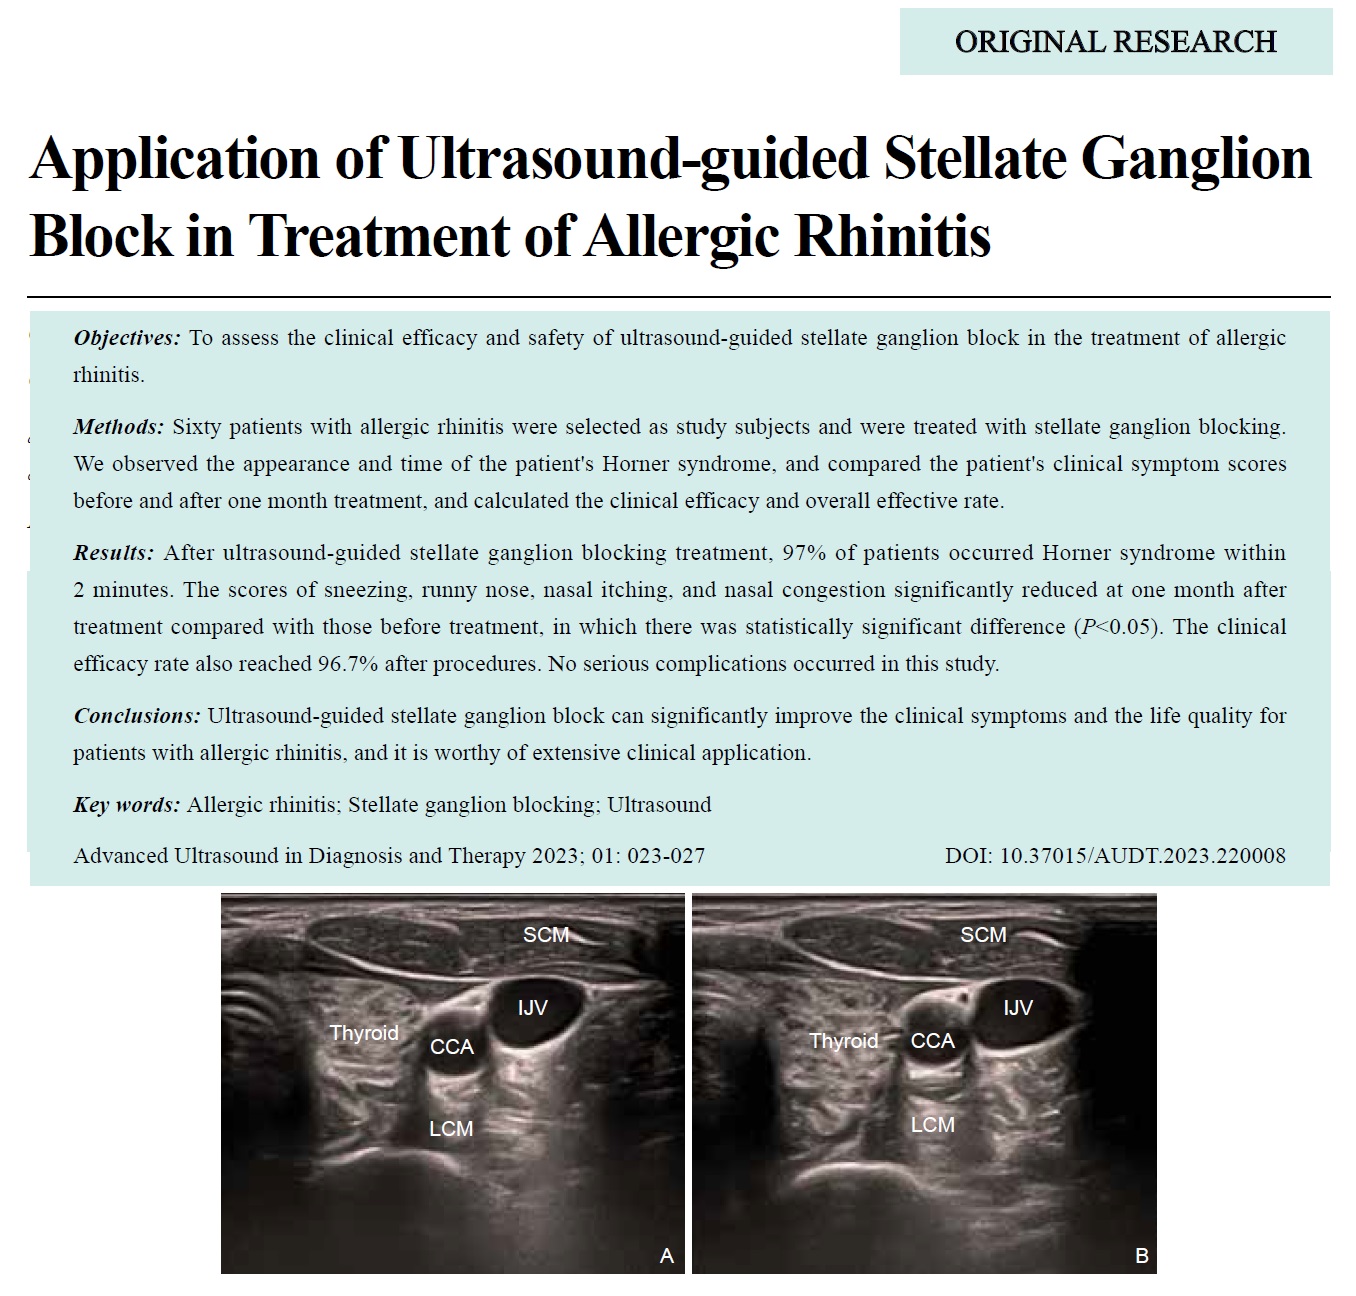 Application of Ultrasound-guided Stellate Ganglion Block in Treatment of Allergic Rhinitis